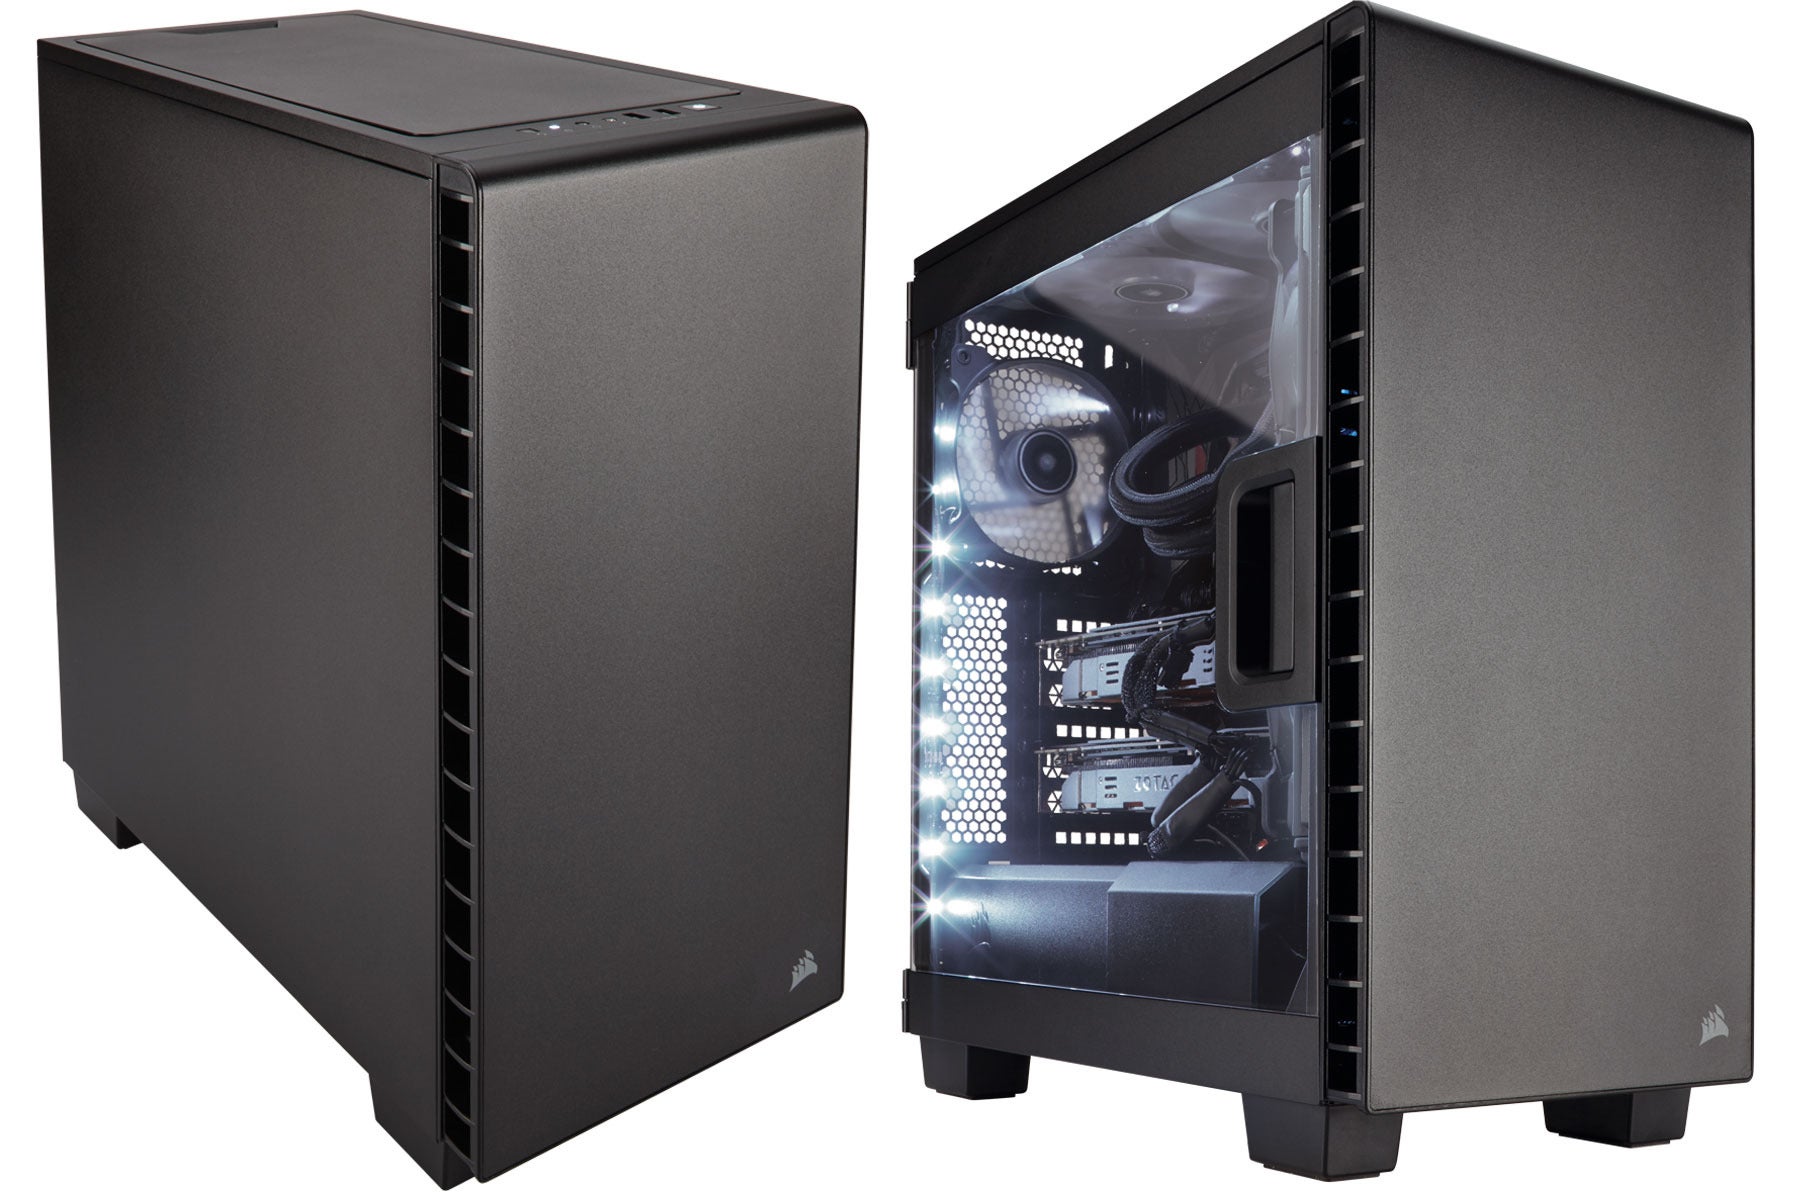 Corsair's new PC cases range from flashy and angular to sleek and sound